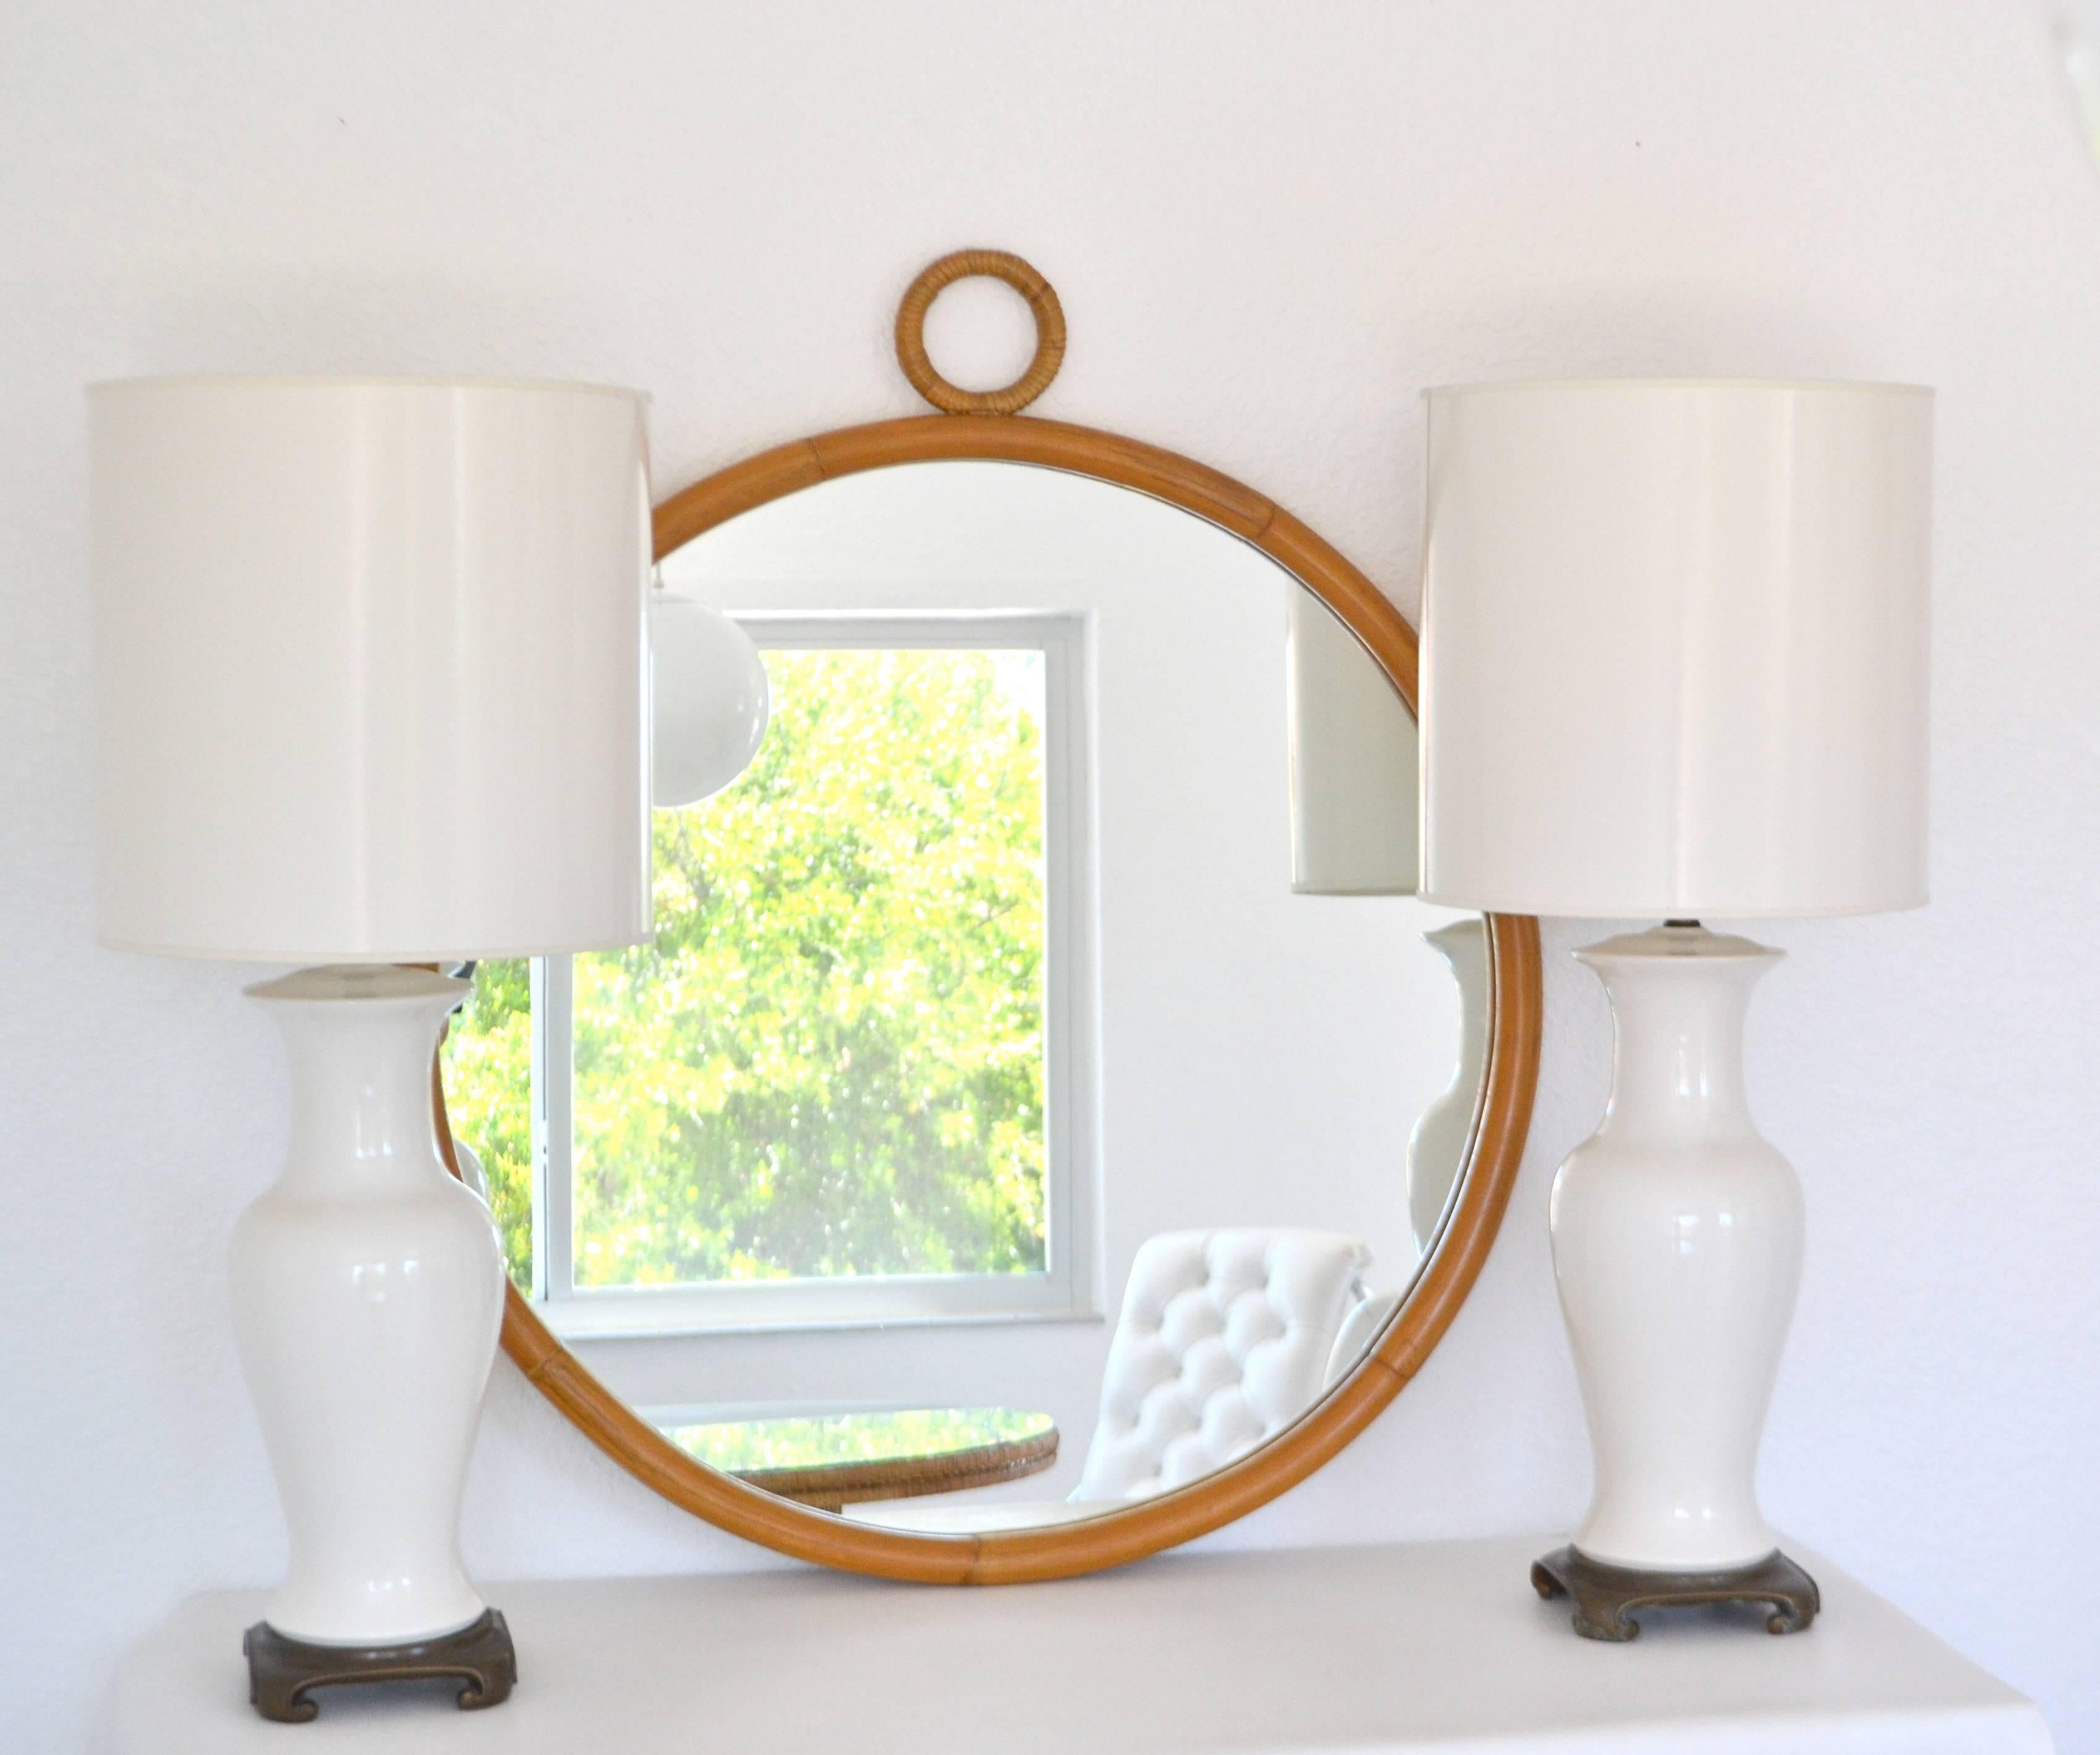 Glamorous Mid-Century bamboo wall mirror, circa 1960s-1970s. This stunning round Jacques Adnet / Gabriella Crespi inspired mirror is designed of bent bamboo and accented with wrapped rattan detail. Original excellent condition with a warm aged